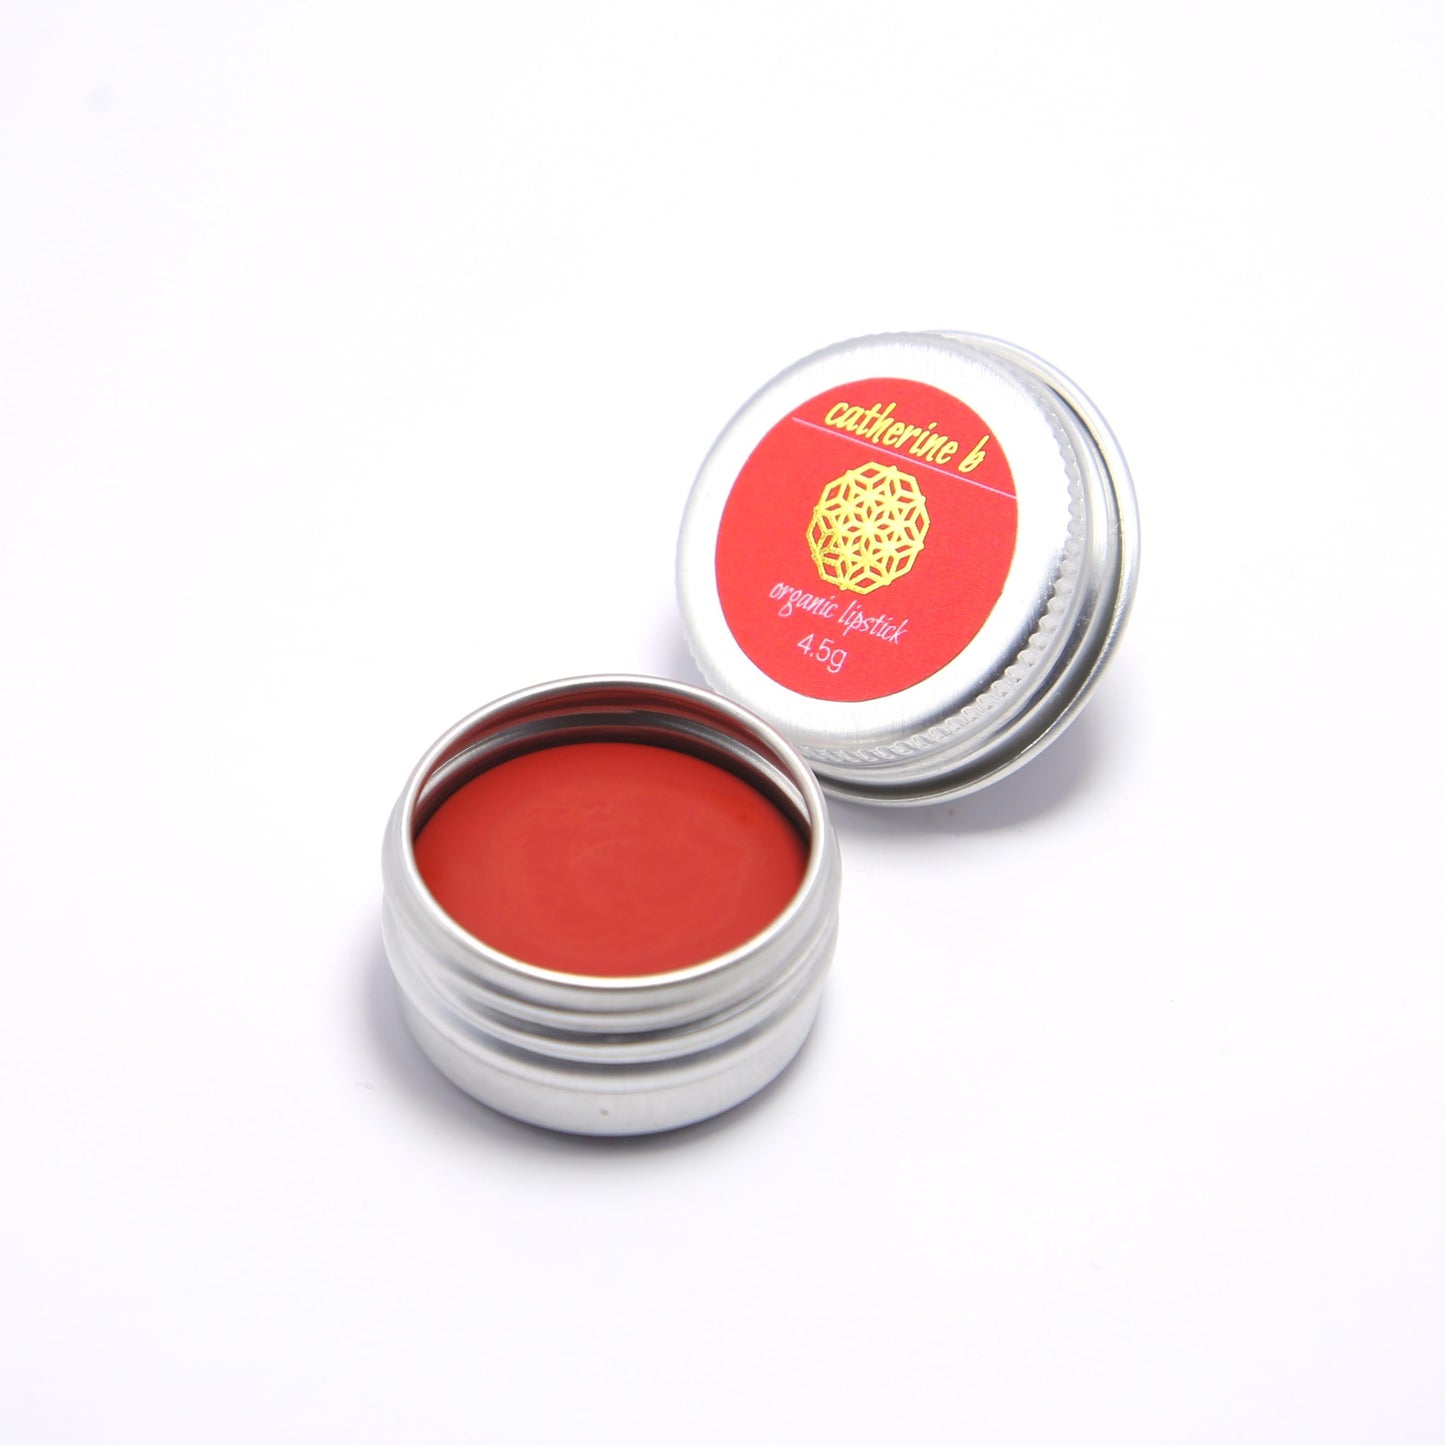 Brick Red - Rich Orange Red Organic Lipstick available in 4.5g tin 